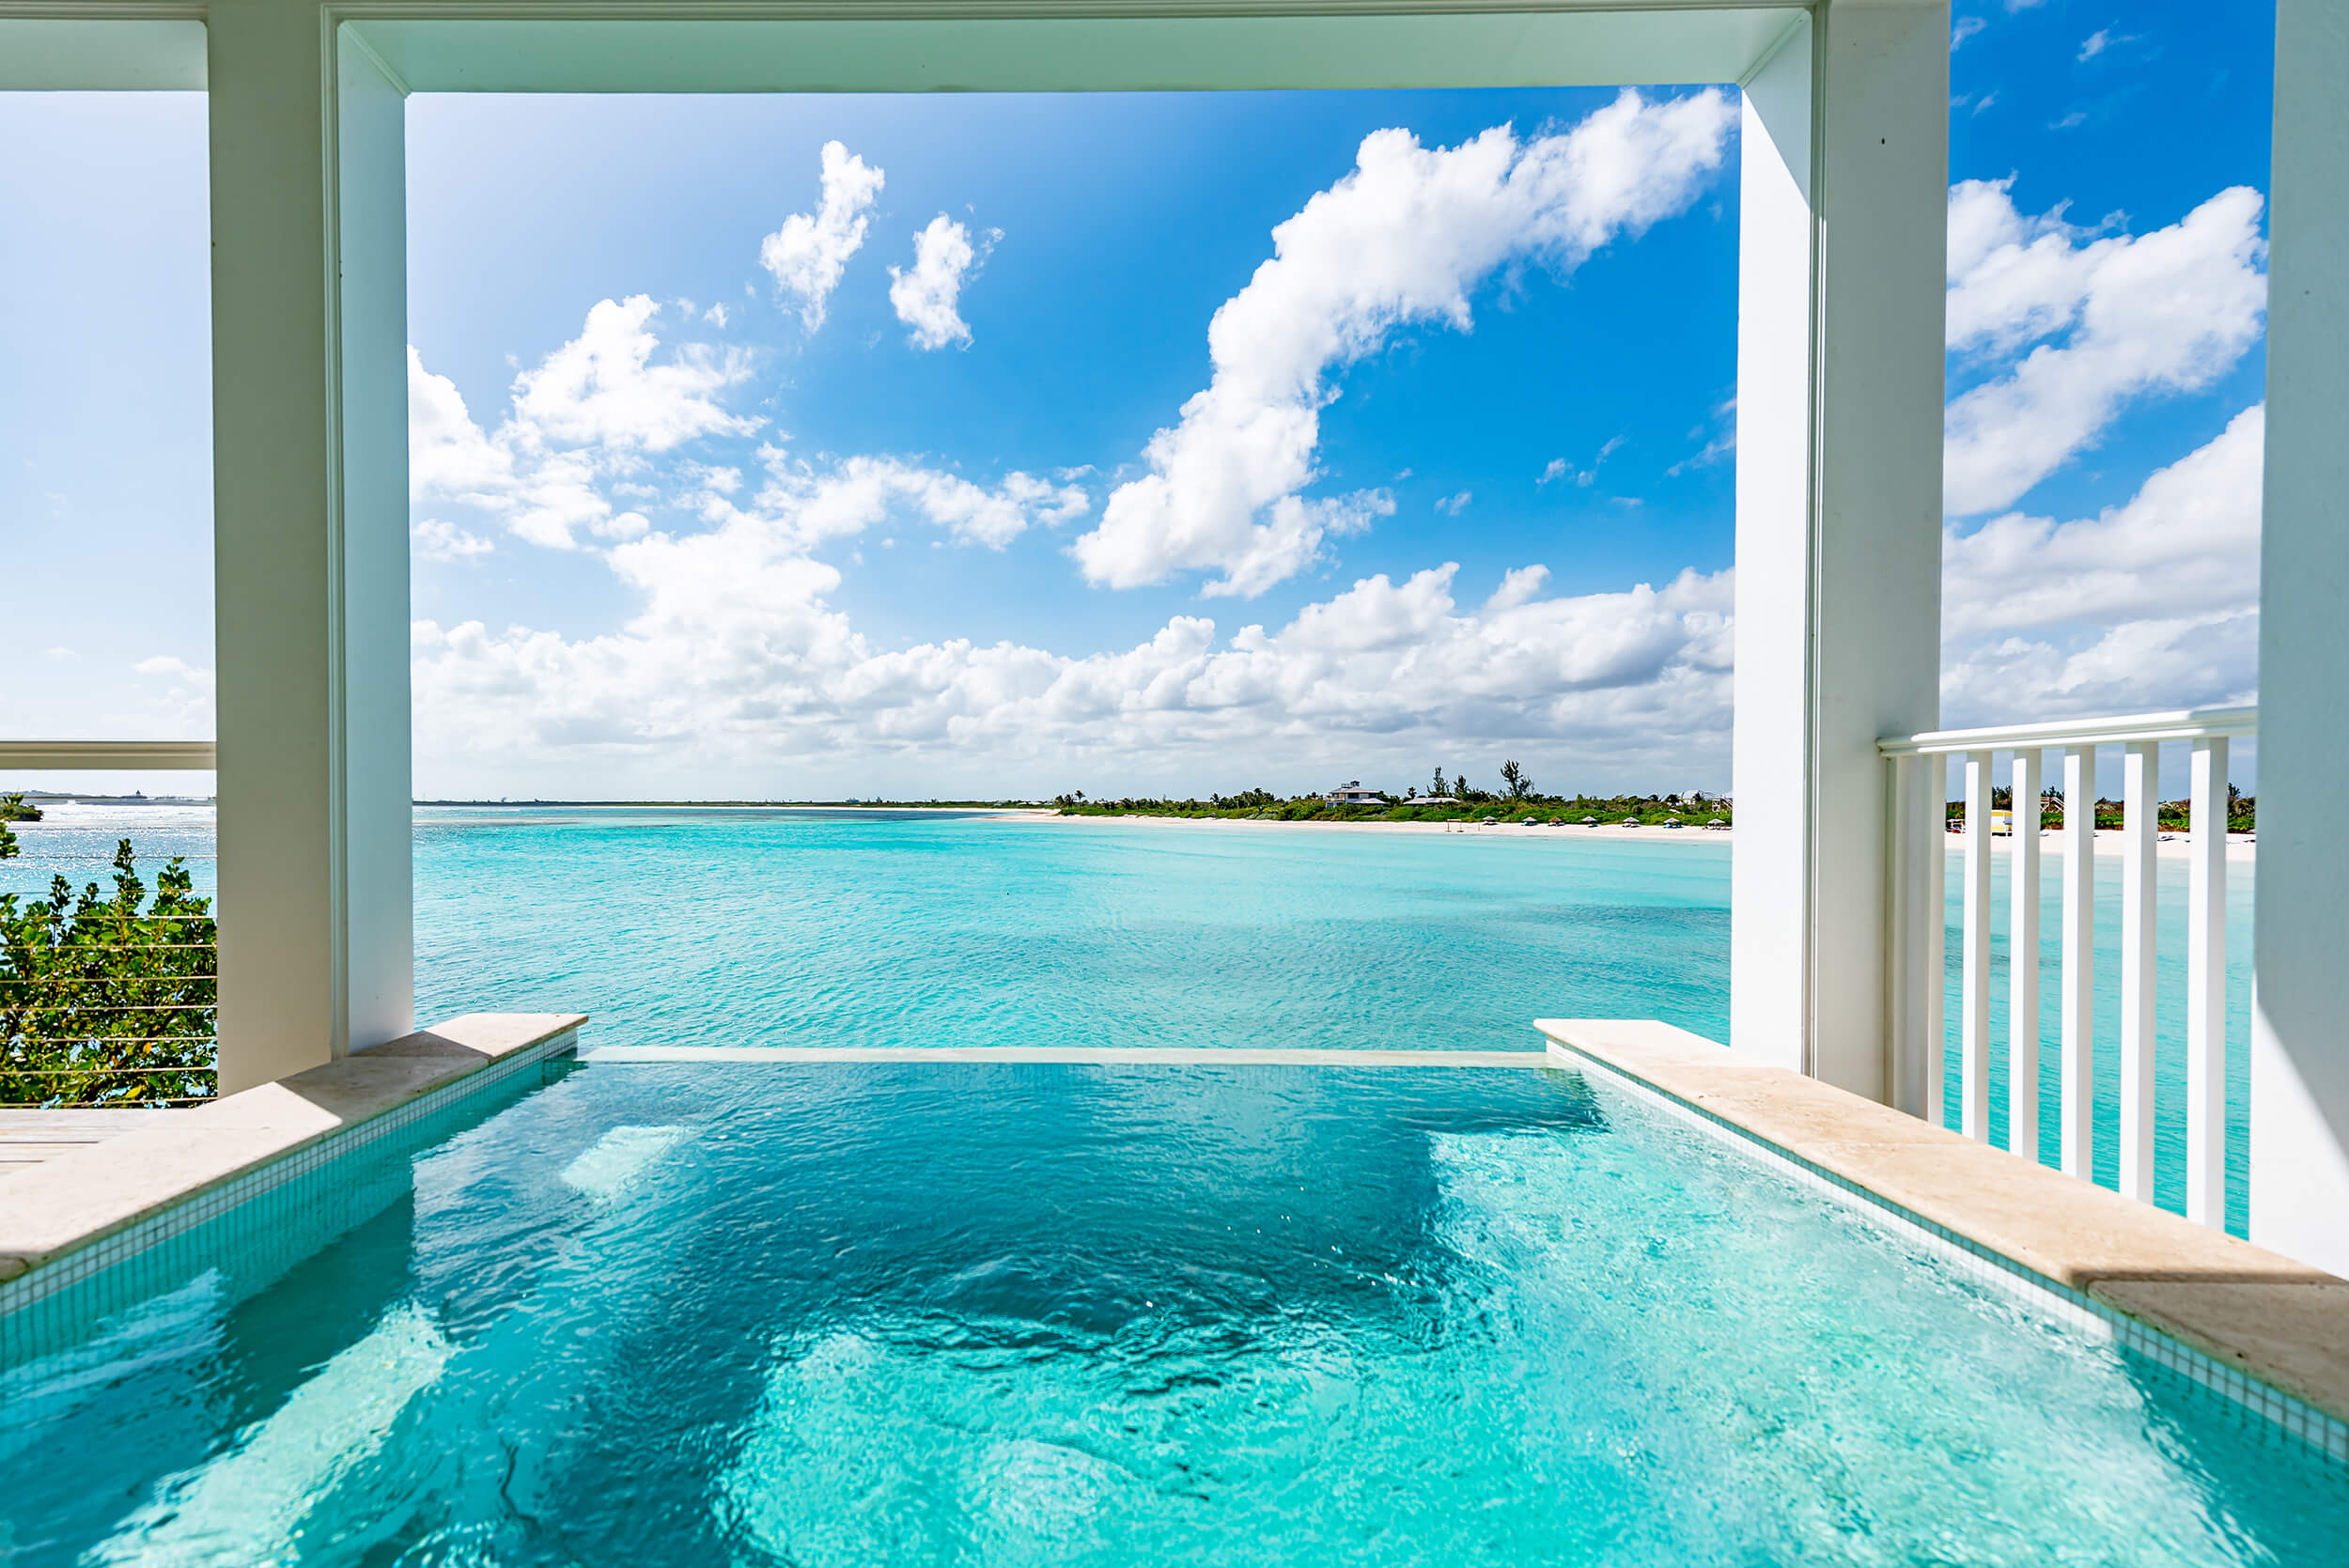 Infinity pool overlooking the turquoise sea at The Abaco Club, capturing the essence of luxurious coastal living